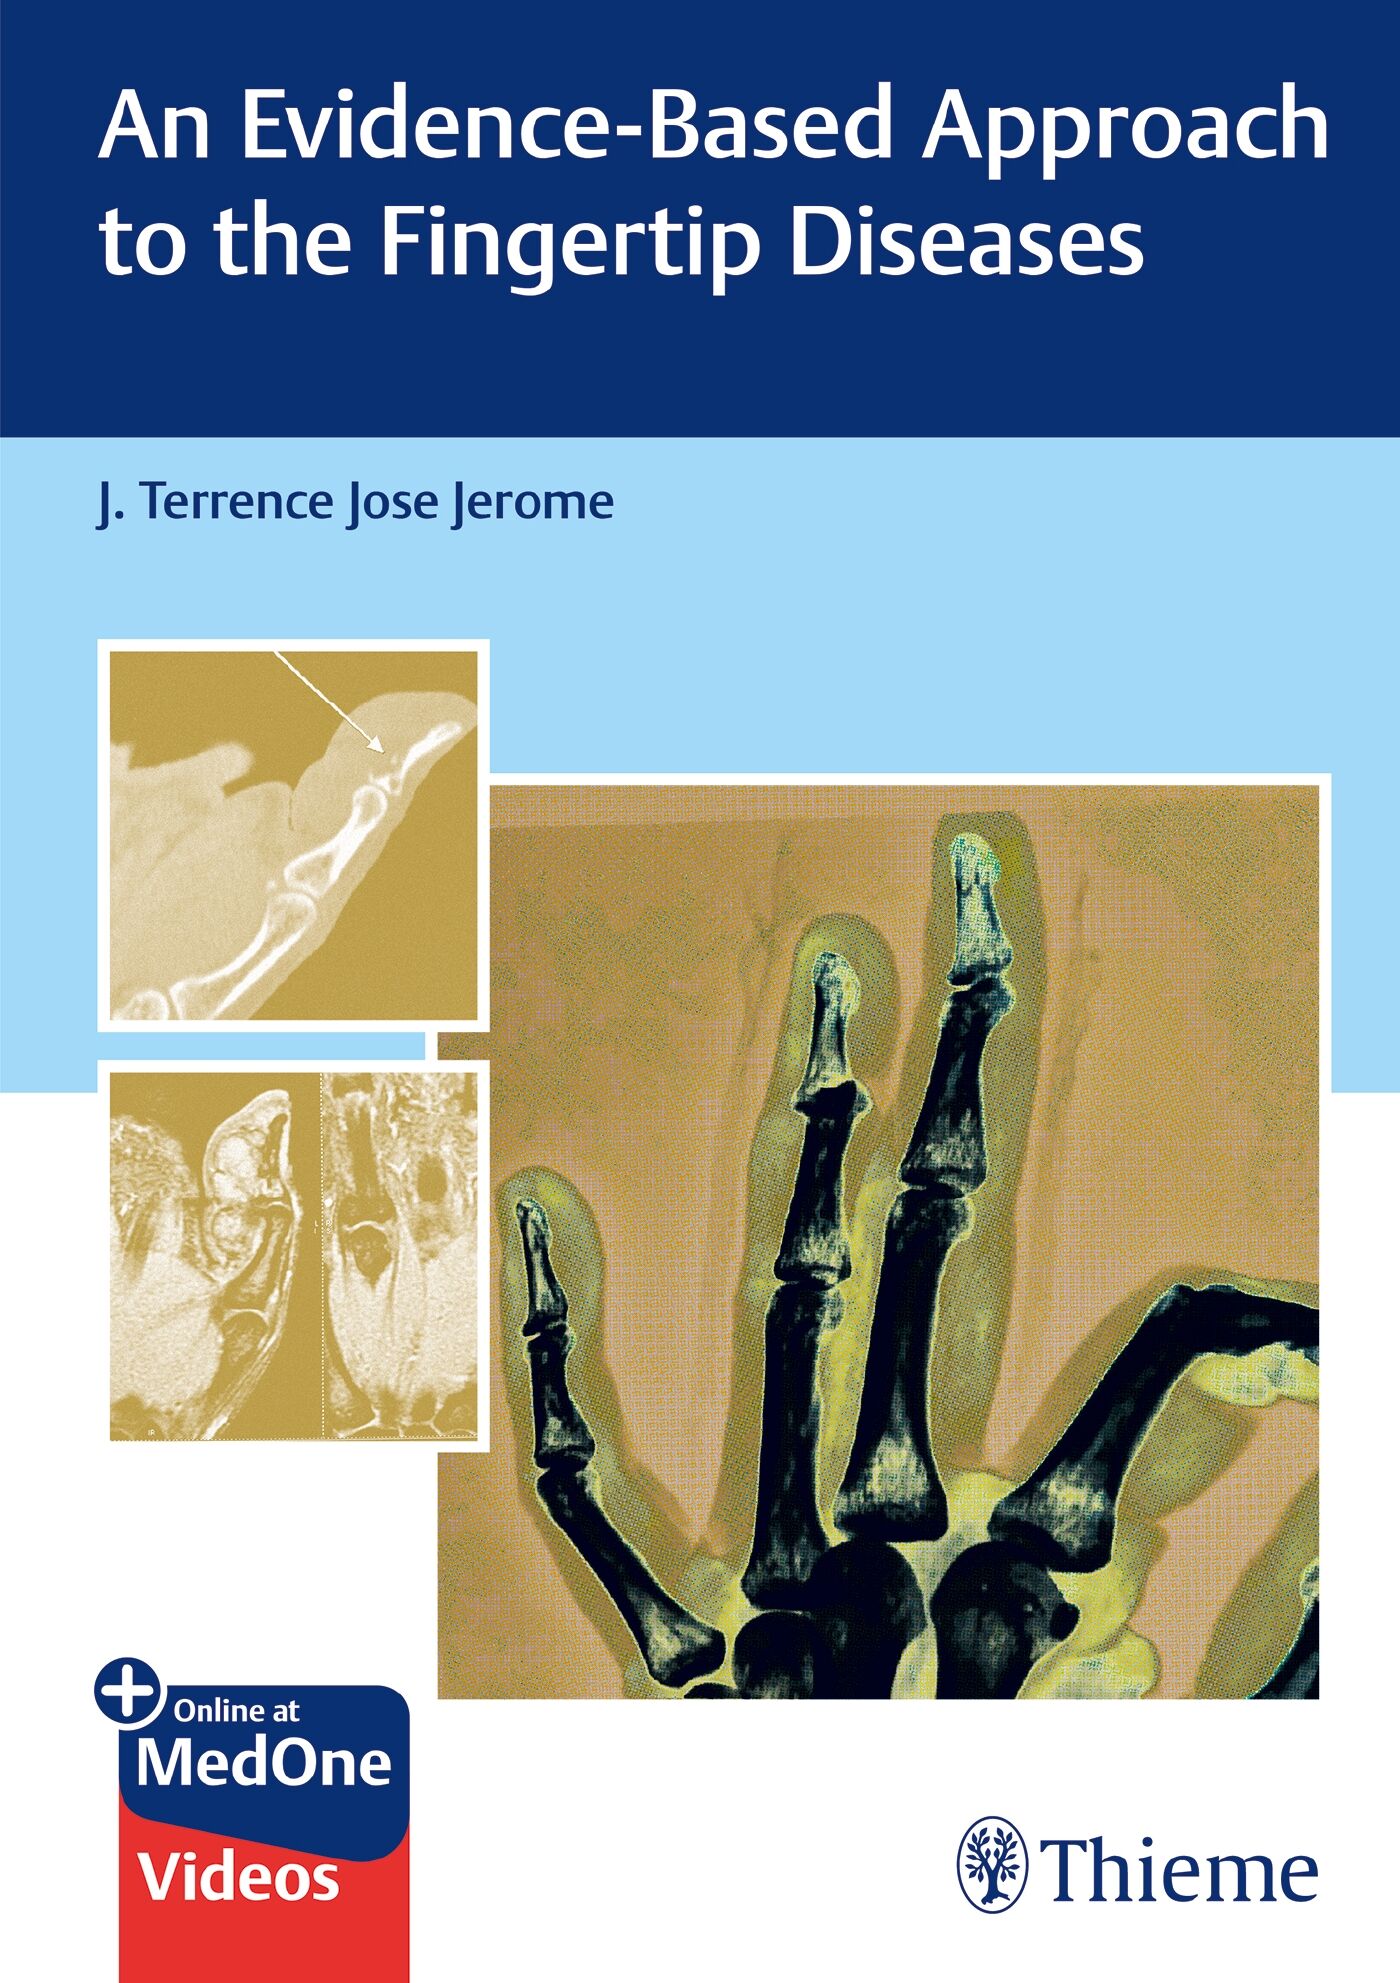 An Evidence-Based Approach to the Fingertip Diseases, 9789392819360